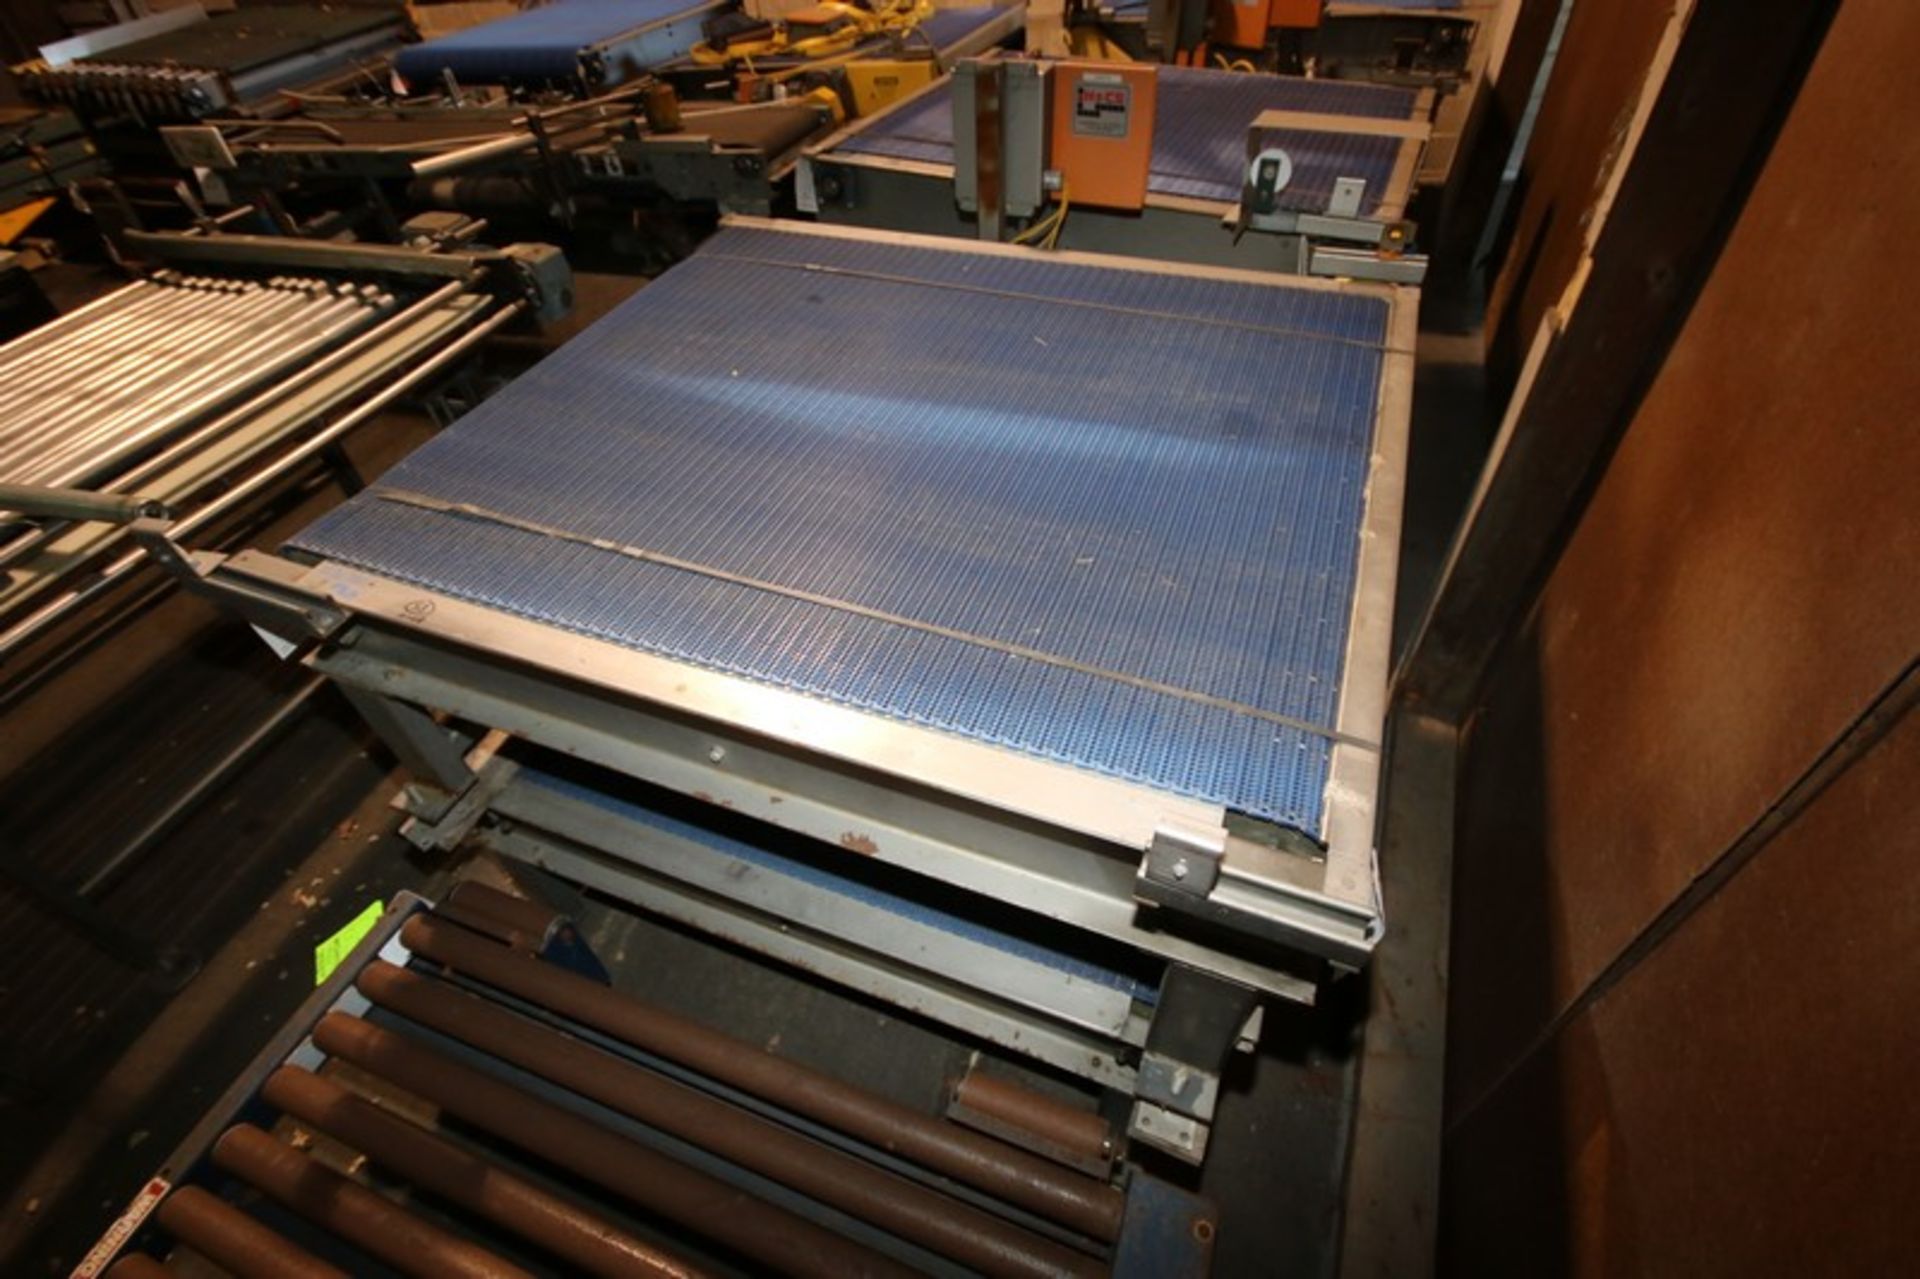 6-Sections of H&CS Conveyors, Overall Dims.: Aprox. 60" L x 64" W x 36" H, with Plastic Blue Belt, - Image 7 of 7